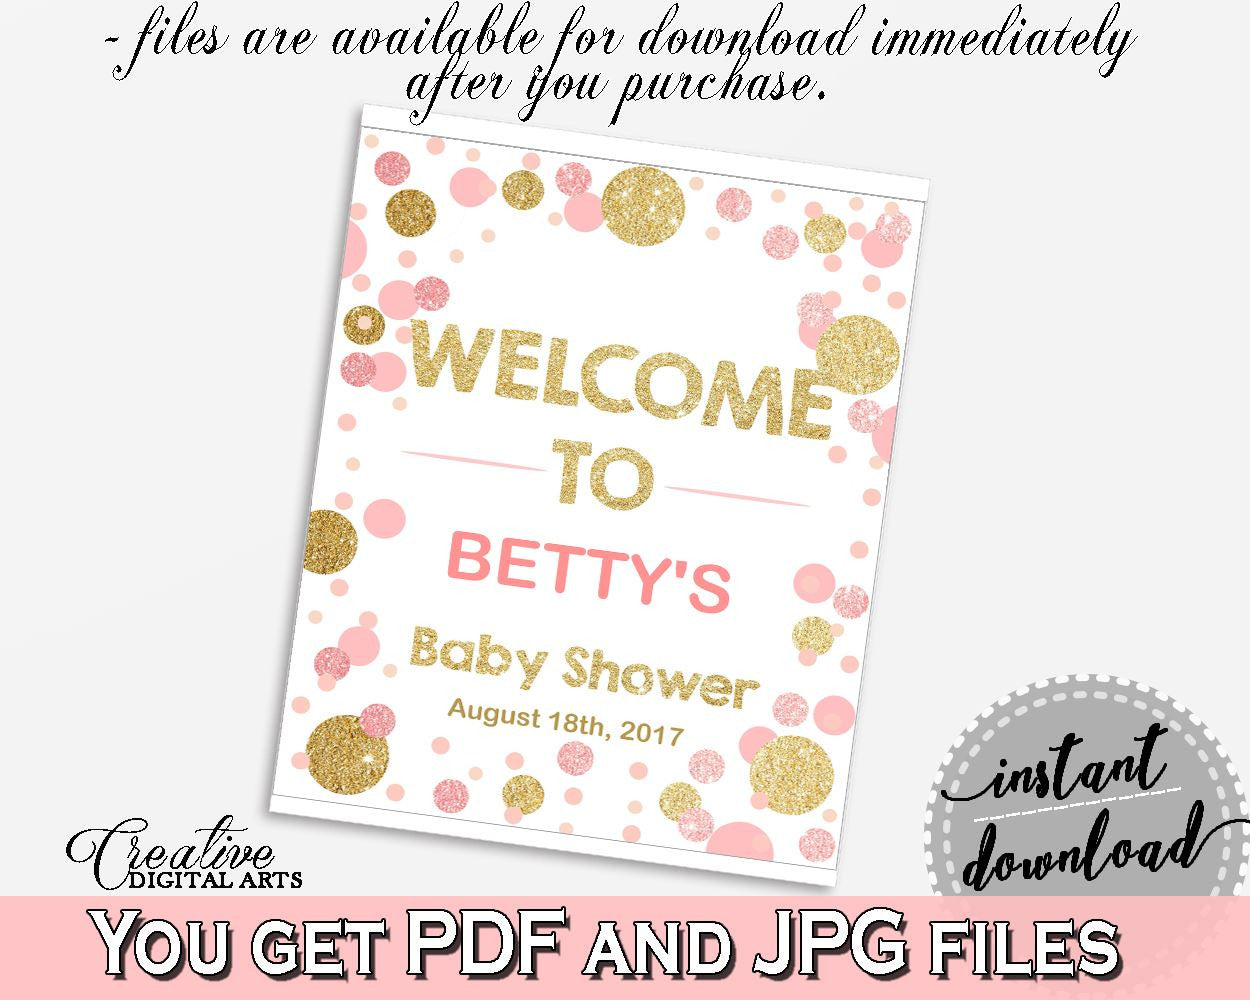 Pink Gold Welcome Sign, Baby Shower Welcome Sign, Dots Baby Shower Welcome Sign, Baby Shower Dots Welcome Sign party stuff - RUK83 - Digital Product